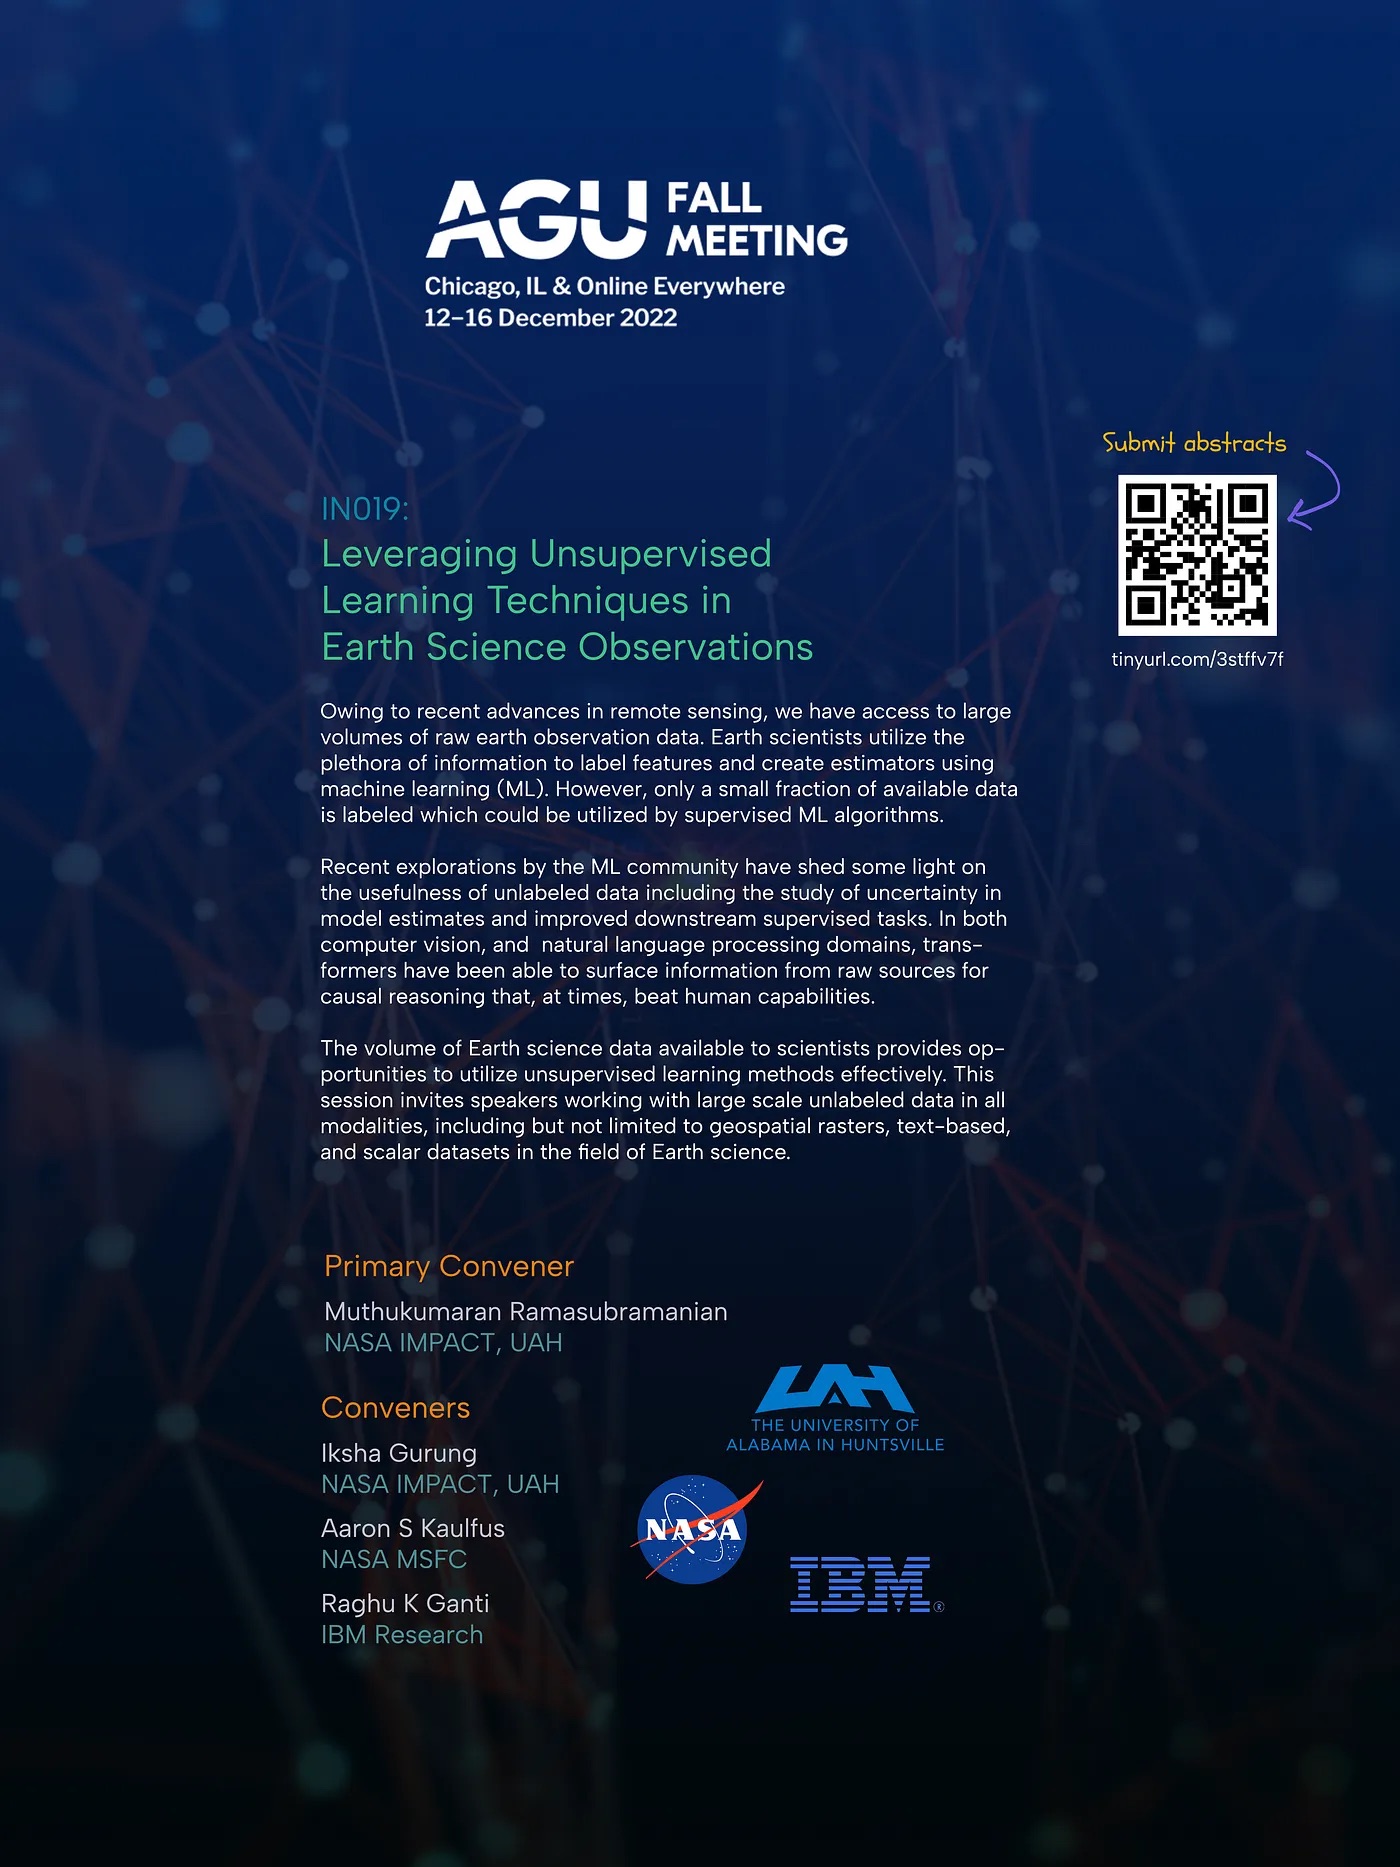 Poster for IN019 — Leveraging Unsupervised Learning Techniques in Earth Science Observations